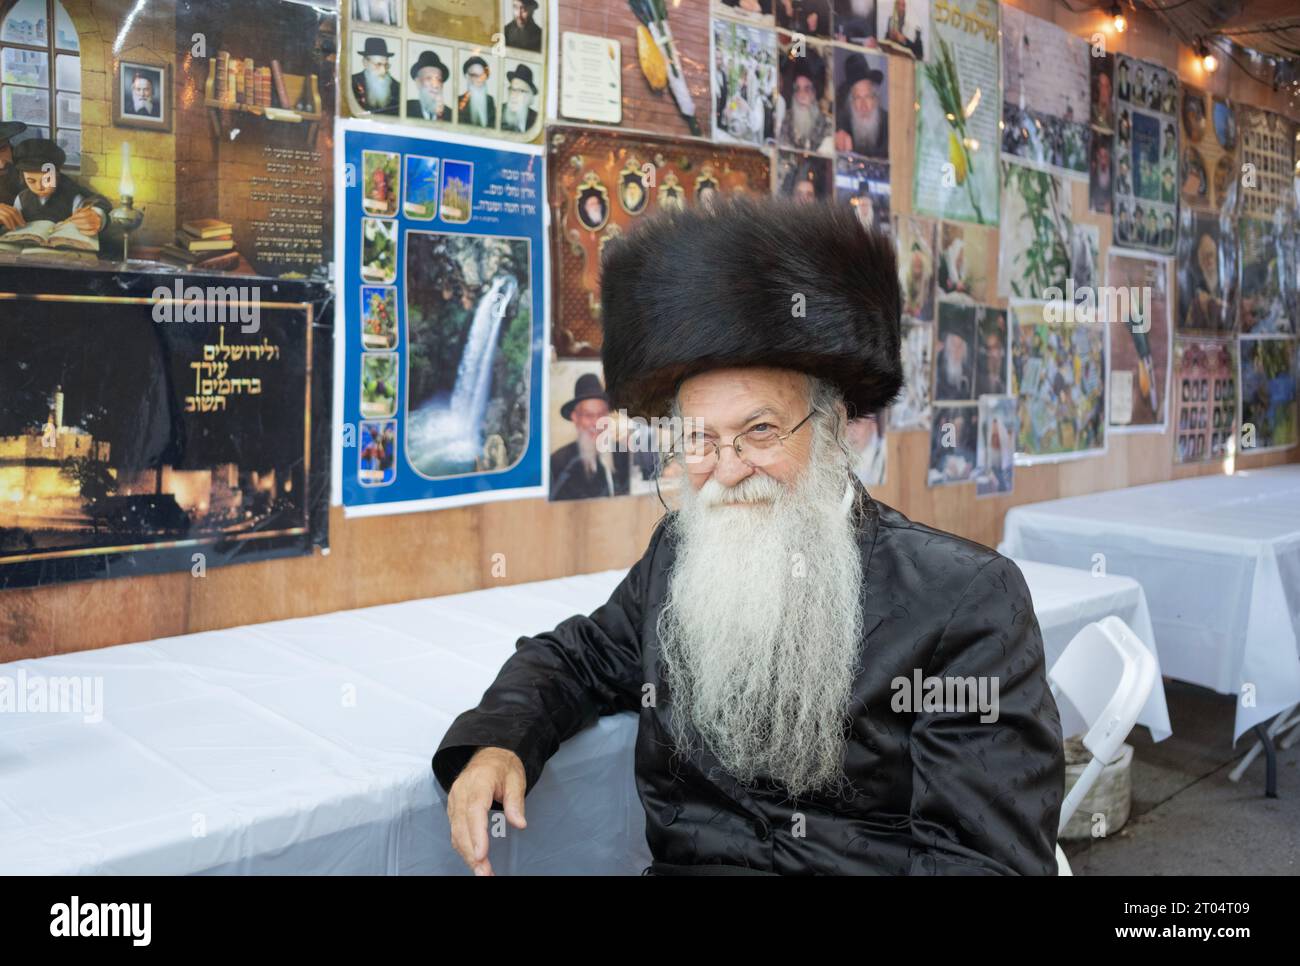 A Jewish man wearing a shtreimel fur hat poses for a photo in a Sukkah on Sukkot. In Monsey, Rockland County, New York. Stock Photo